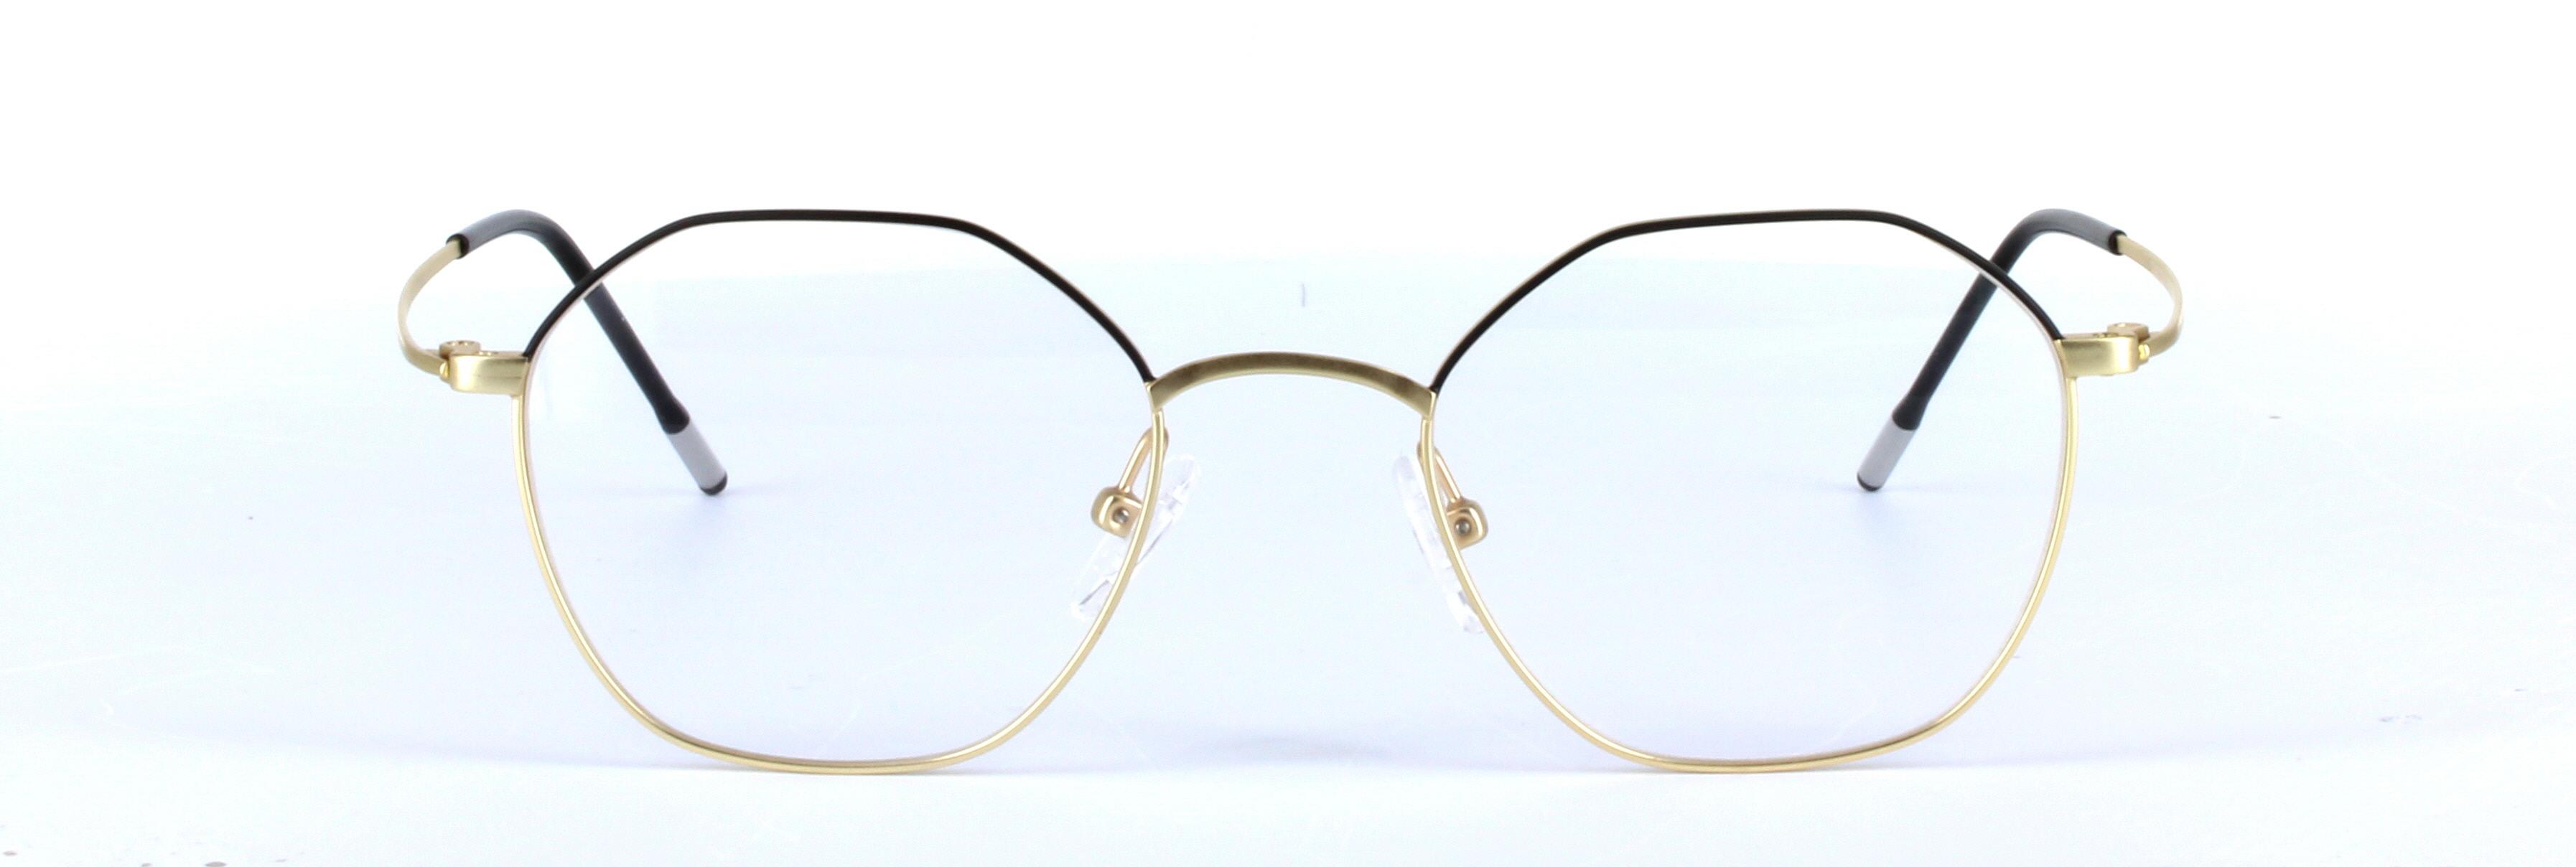 Maiver Gold and Black Full Rim Round Metal Glasses - Image View 5